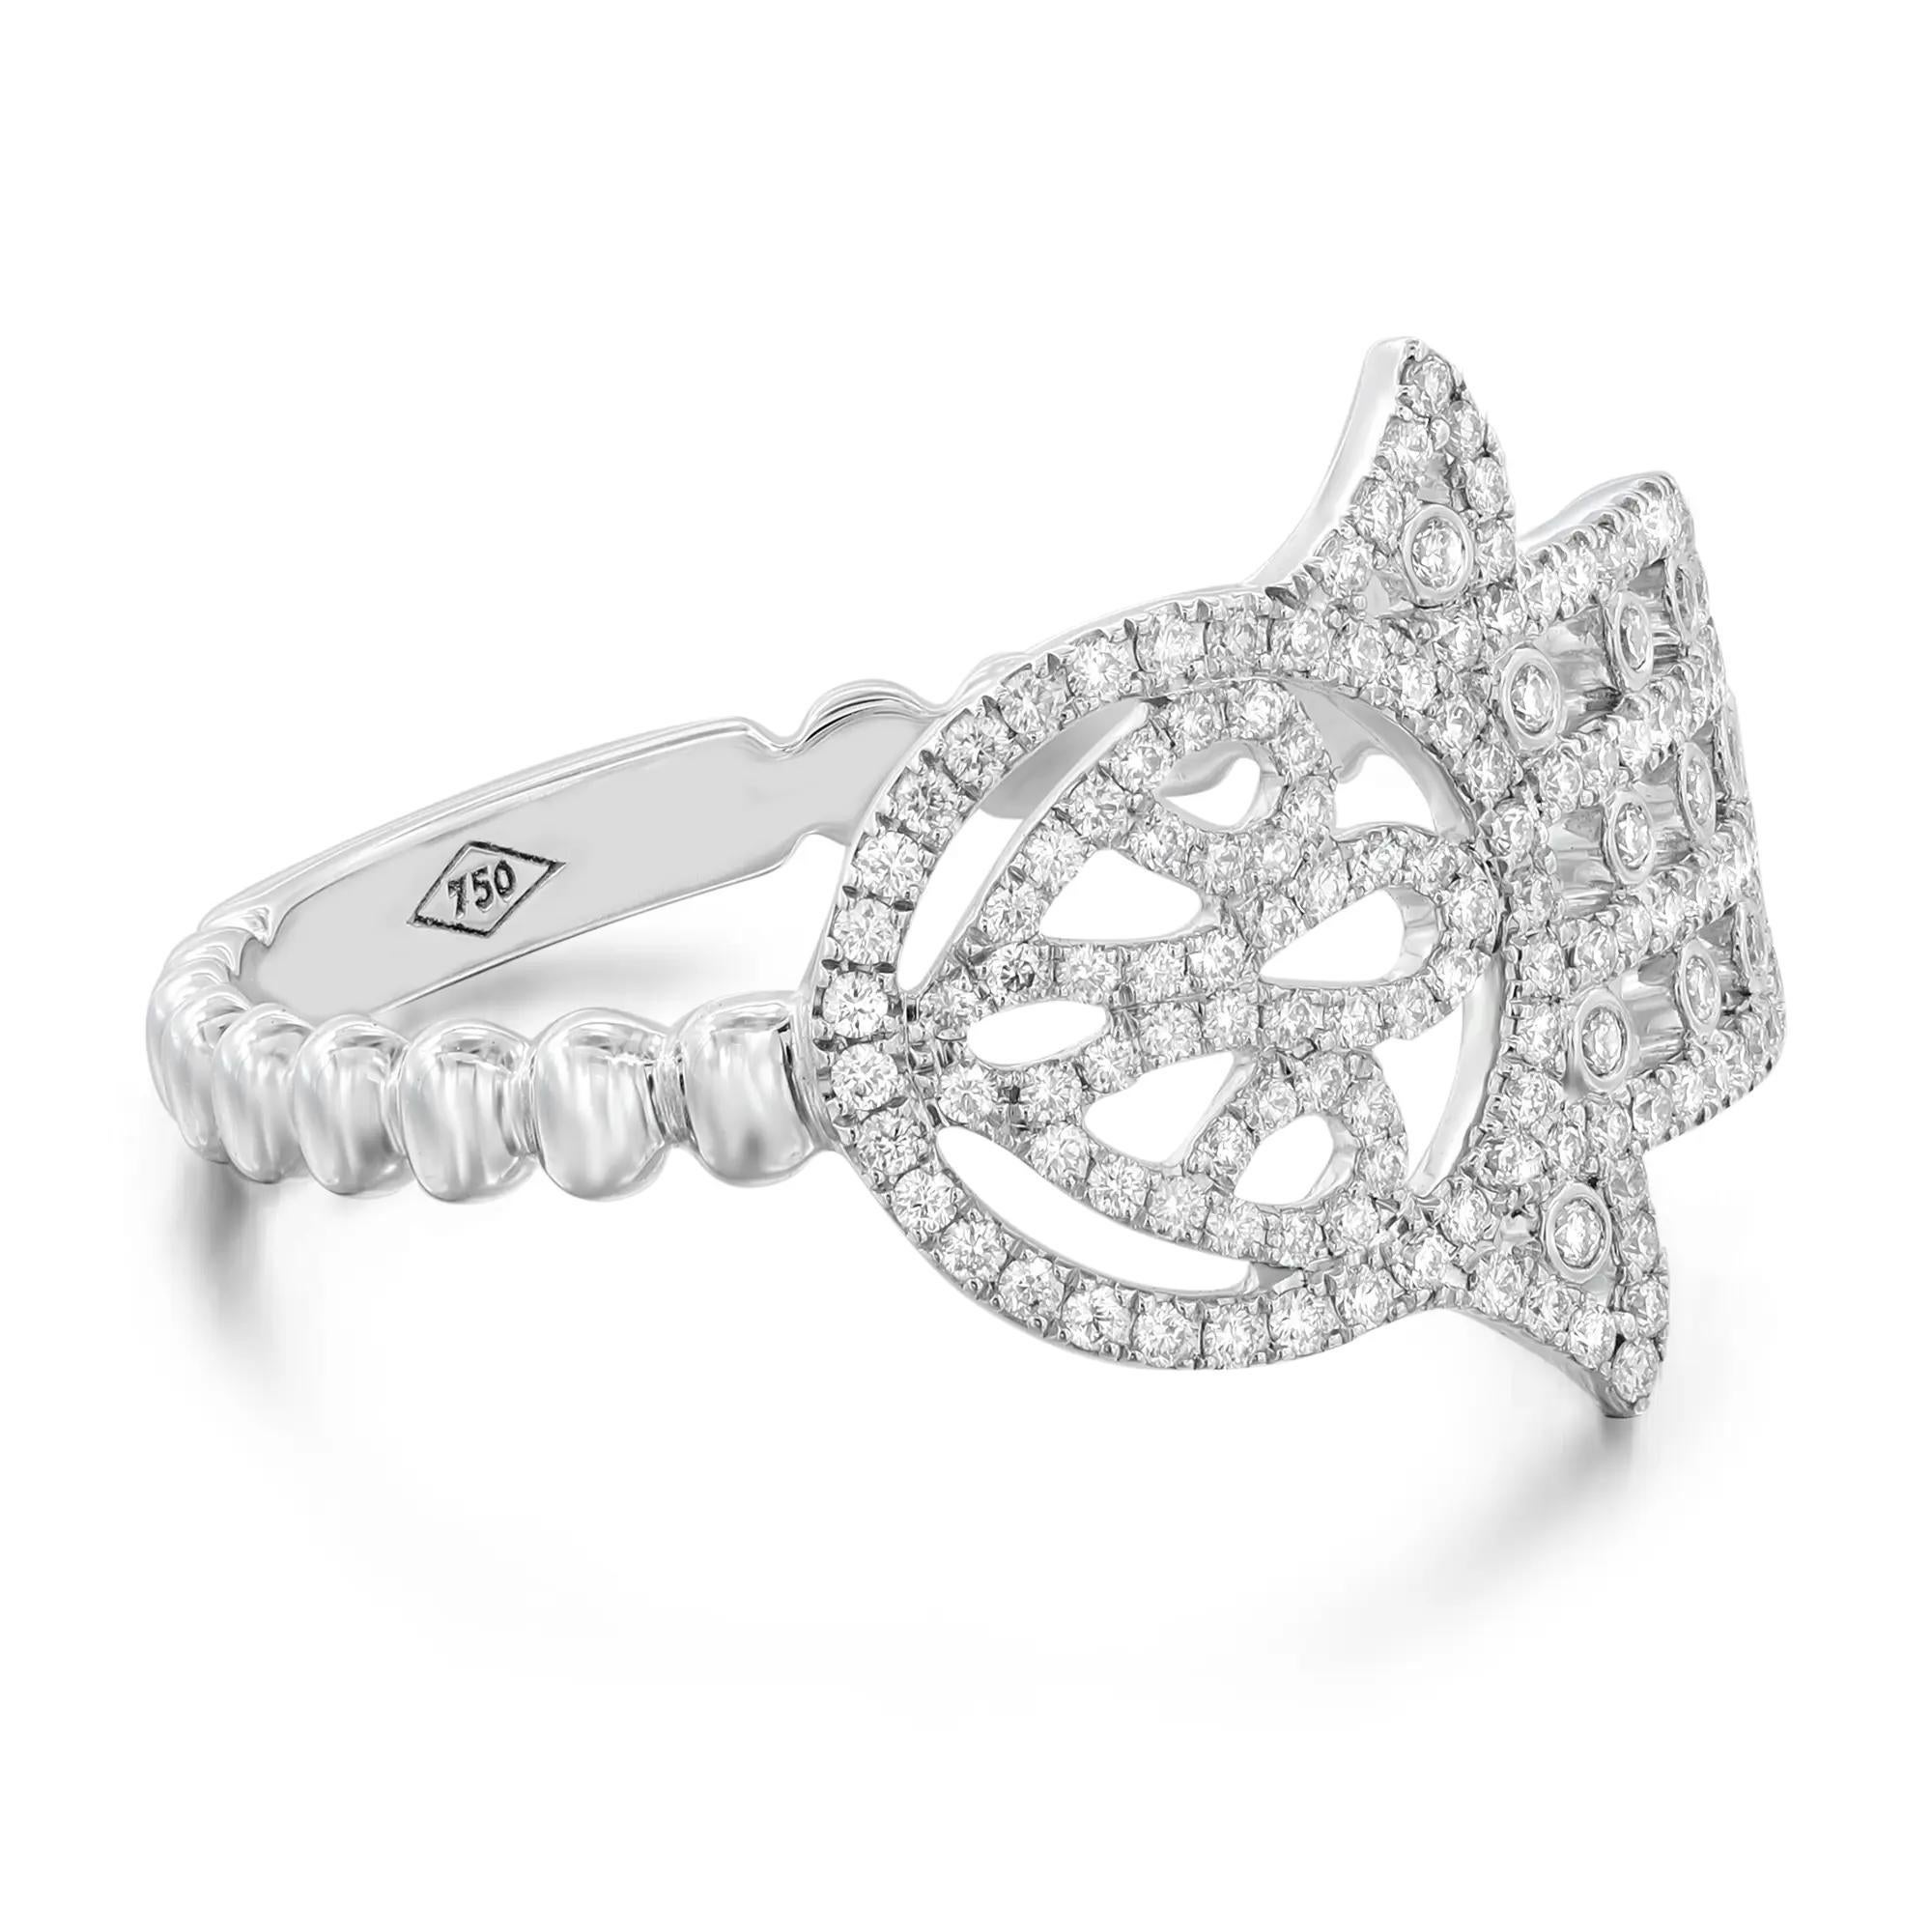 This unique Messika Faith diamond band ring features a Hamsa sign studded with pave set round brilliant cut diamonds weighing 0.24 carat, designed to protect and ward off negative energies. Diamond color G and clarity VS. Crafted in 18K white gold.